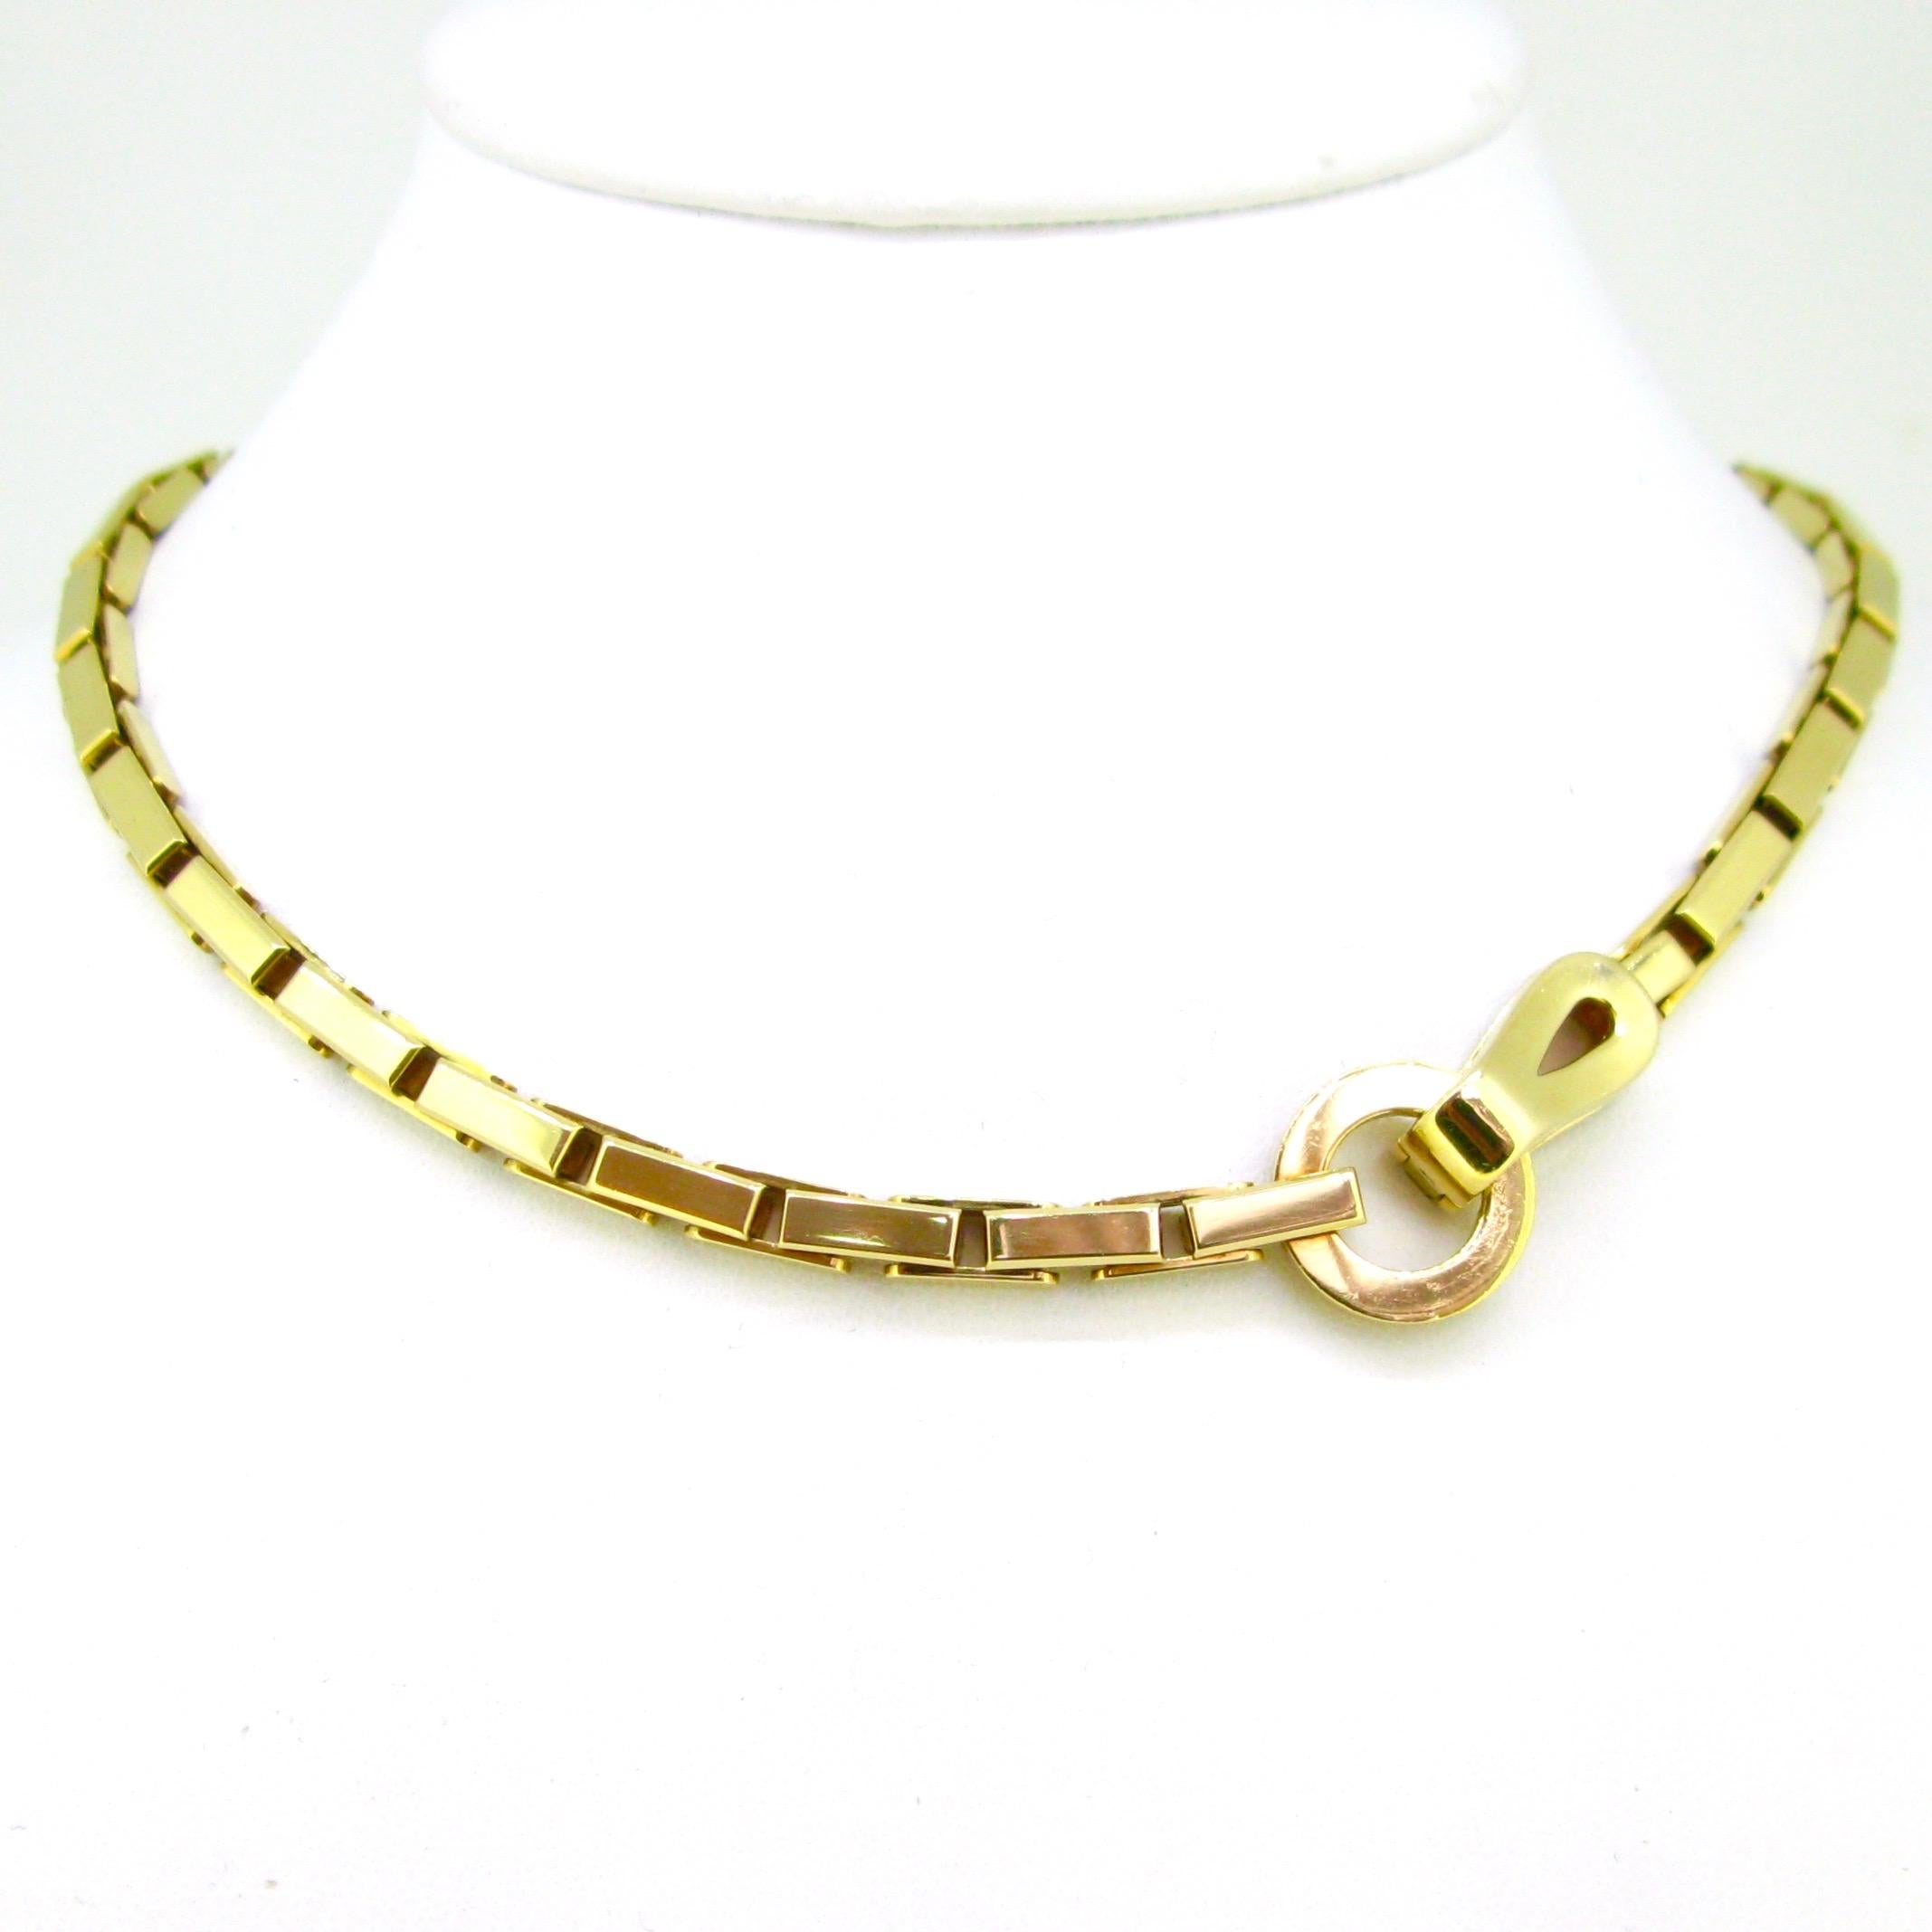 This vintage necklace is from the Agrafe collection, made by Cartier. The hook shape clasp looks like an “Agrafe” as it means in French a clasp / a hook. The gold is smooth and shiny, very confortable to wear. The clasp is signed Cartier and